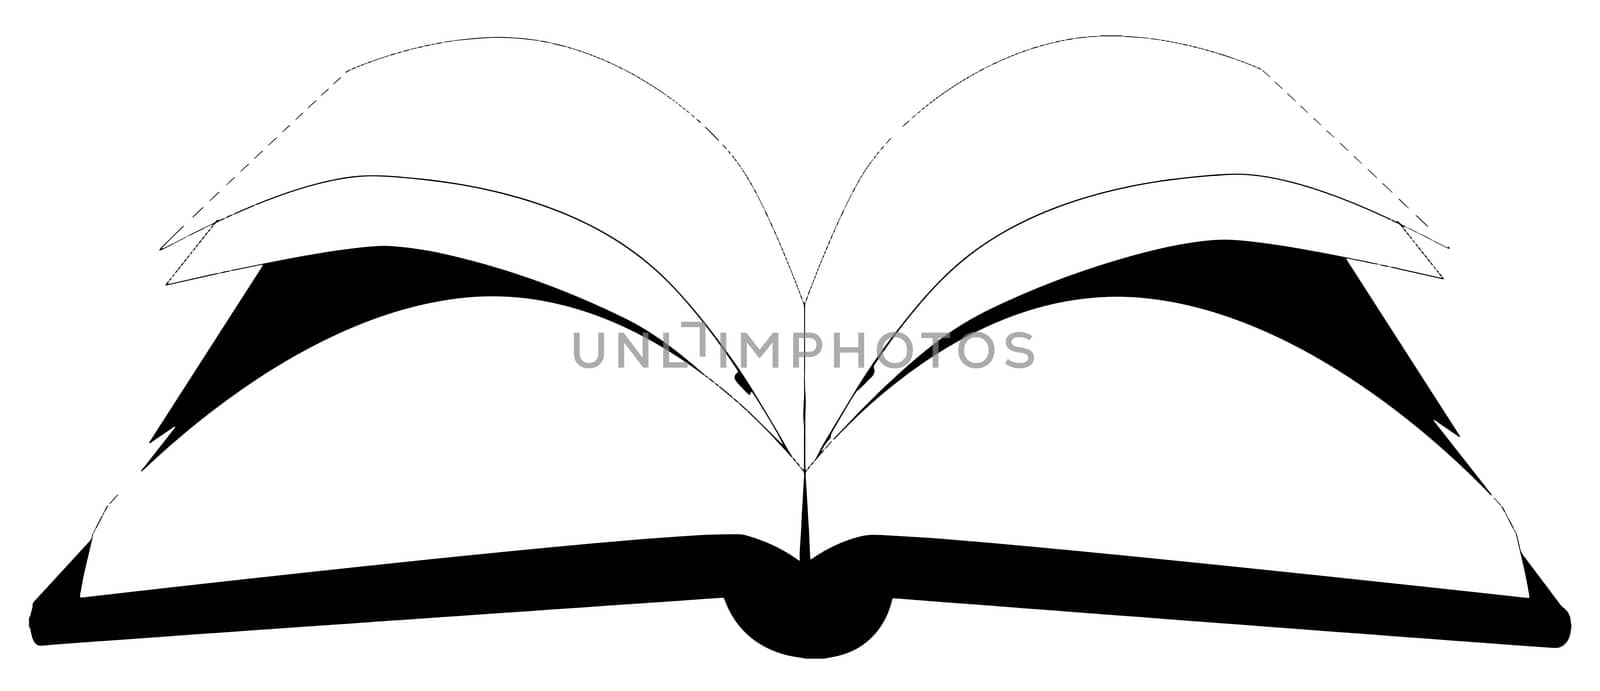 An open book in black and white on a white background